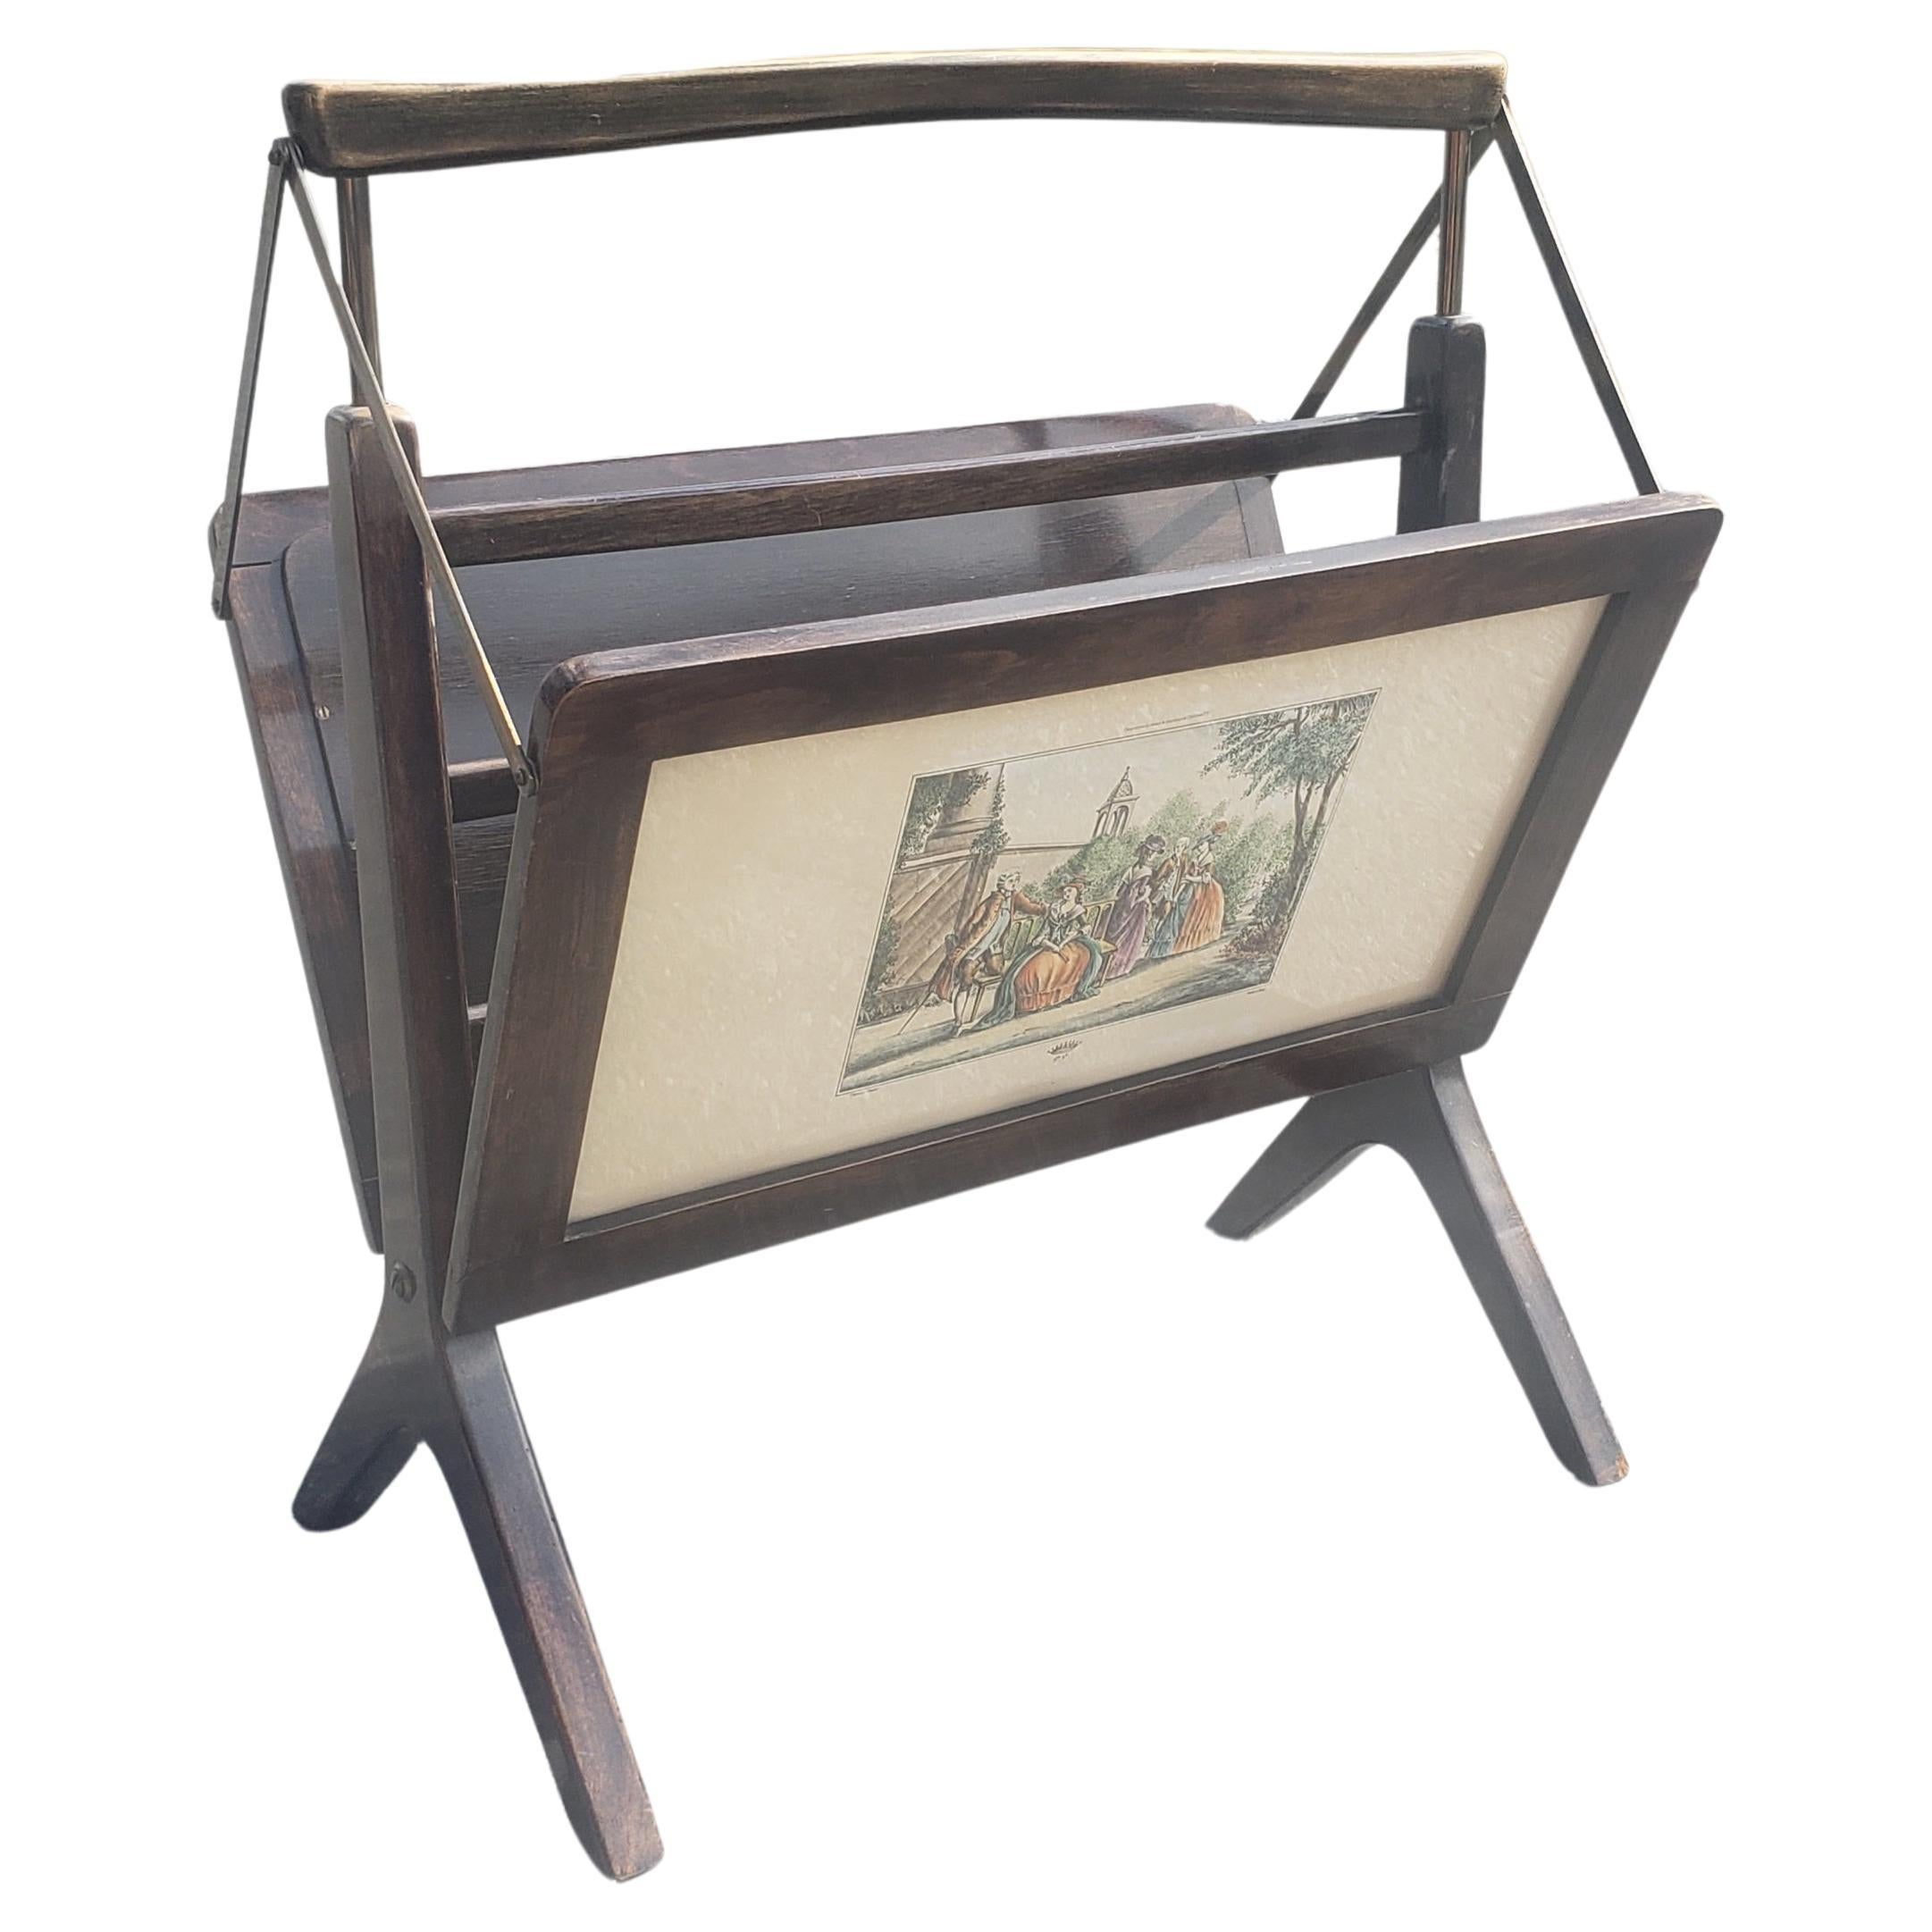 Midcentury Wood and Brass Italian Magazine Rack in Ico Parisi Style, 1950s For Sale